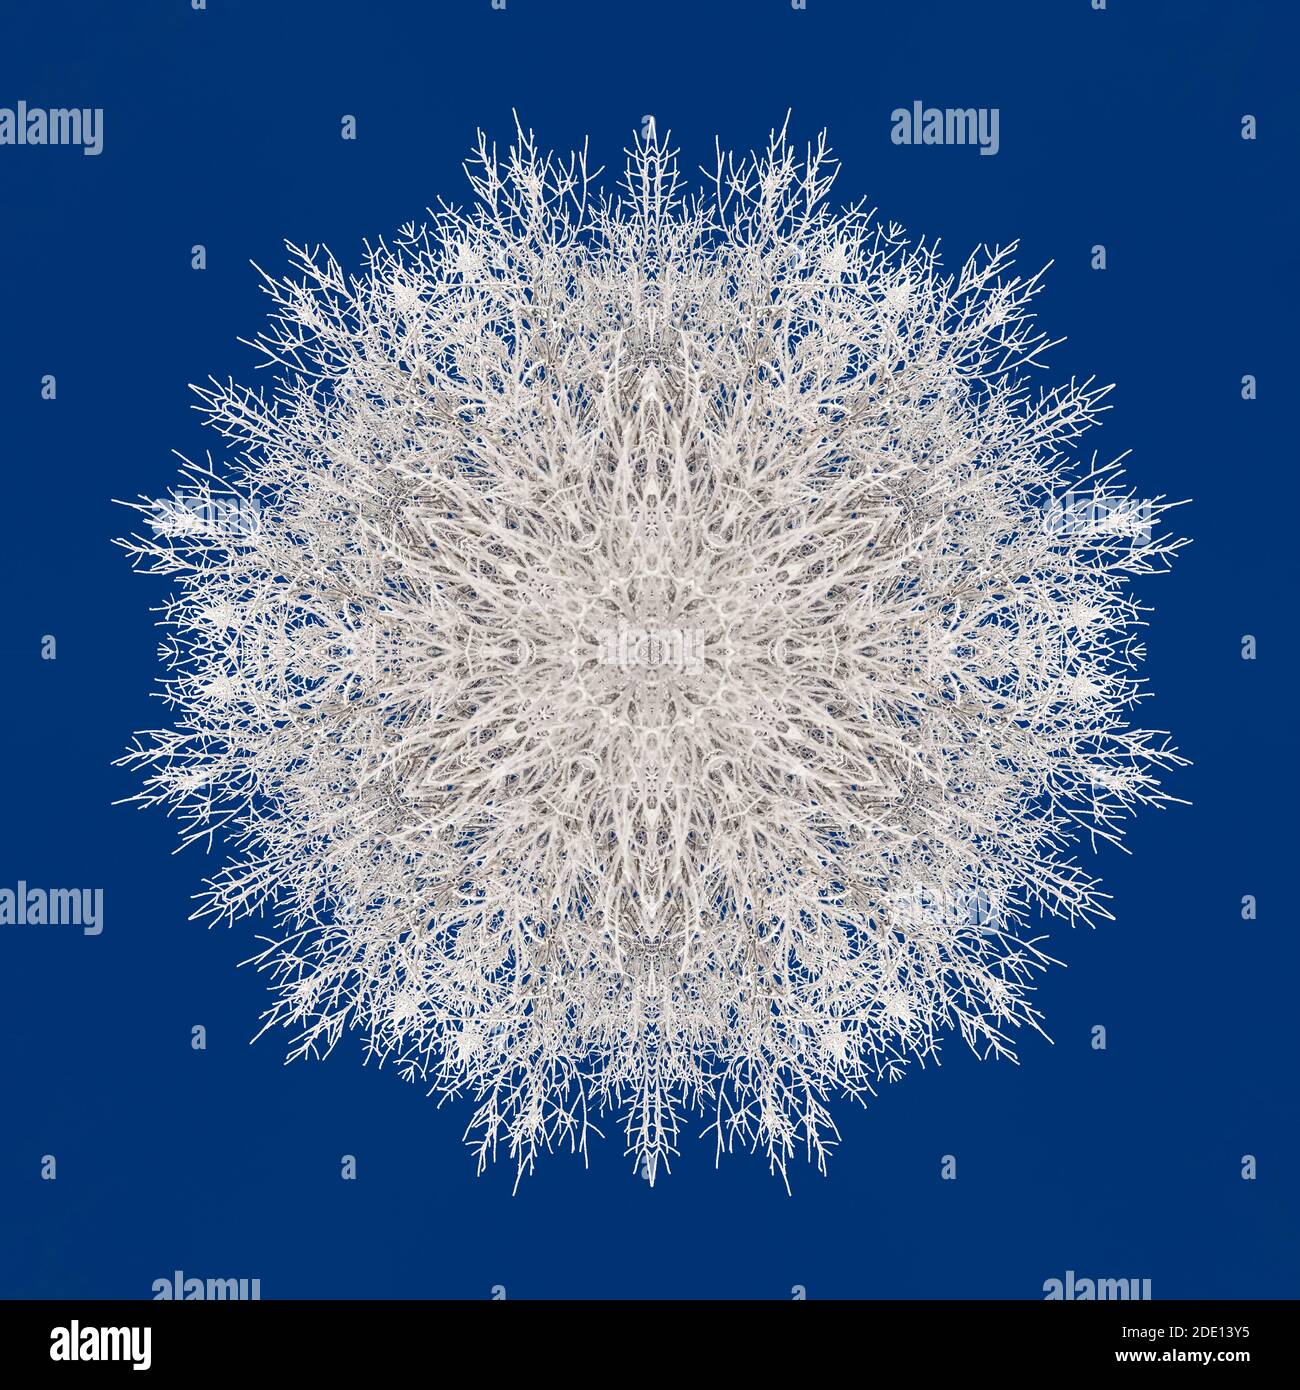 Kaleidoscope effect of frosted branches on a blue sky makes it look like a big snowflake Stock Photo